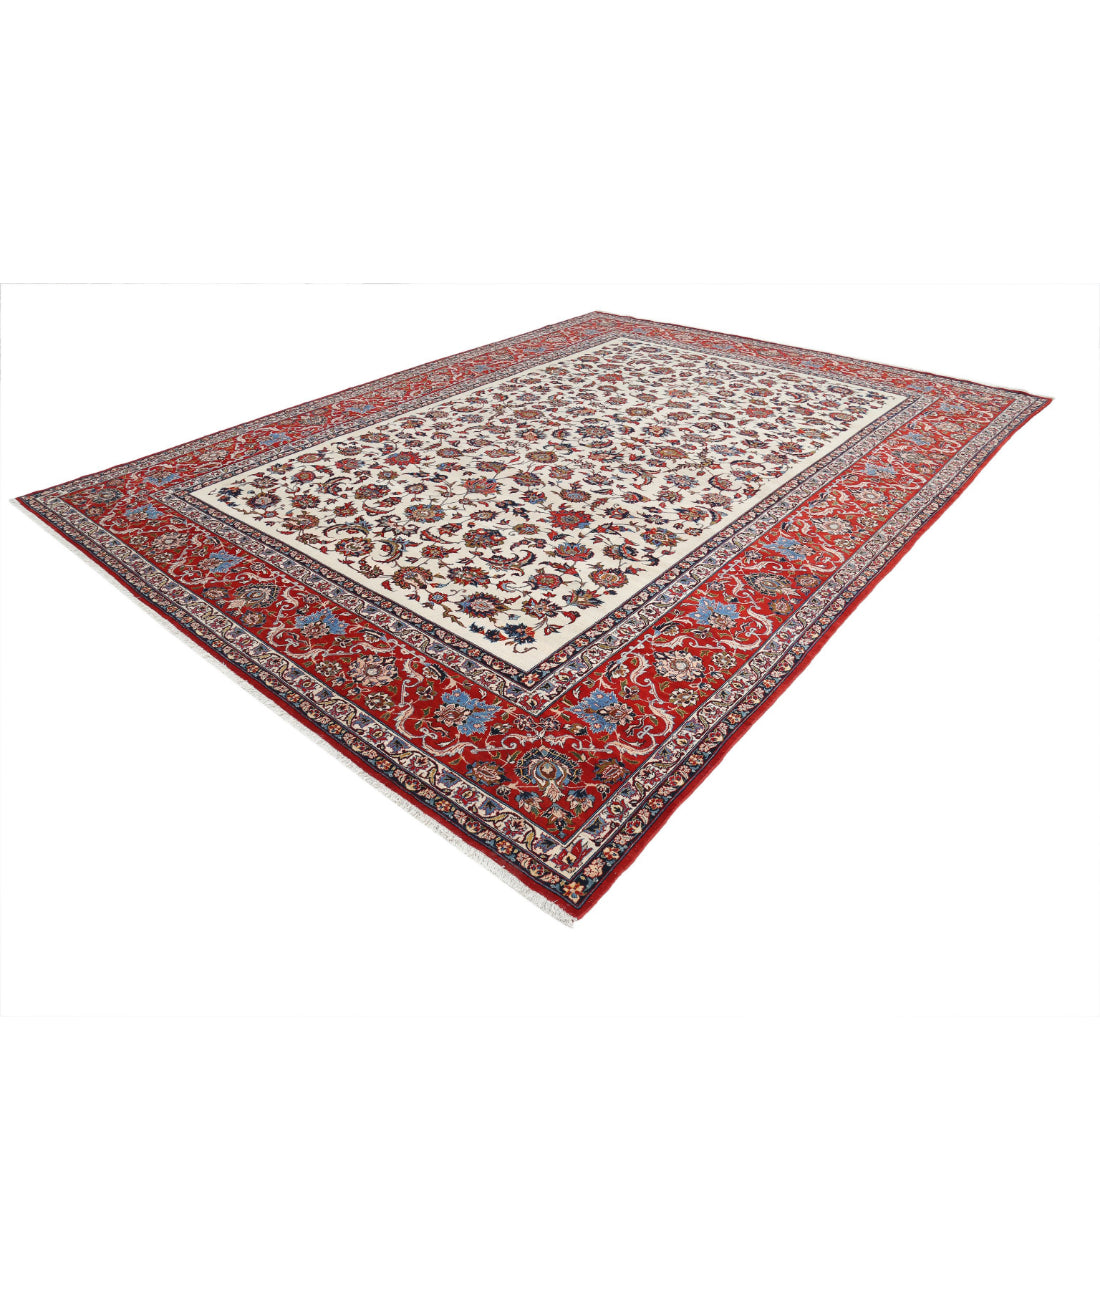 Hand Knotted Masterpiece Isfahan Wool Rug - 10'9'' x 14'6'' 10'9'' x 14'6'' (323 X 435) / Ivory / Red